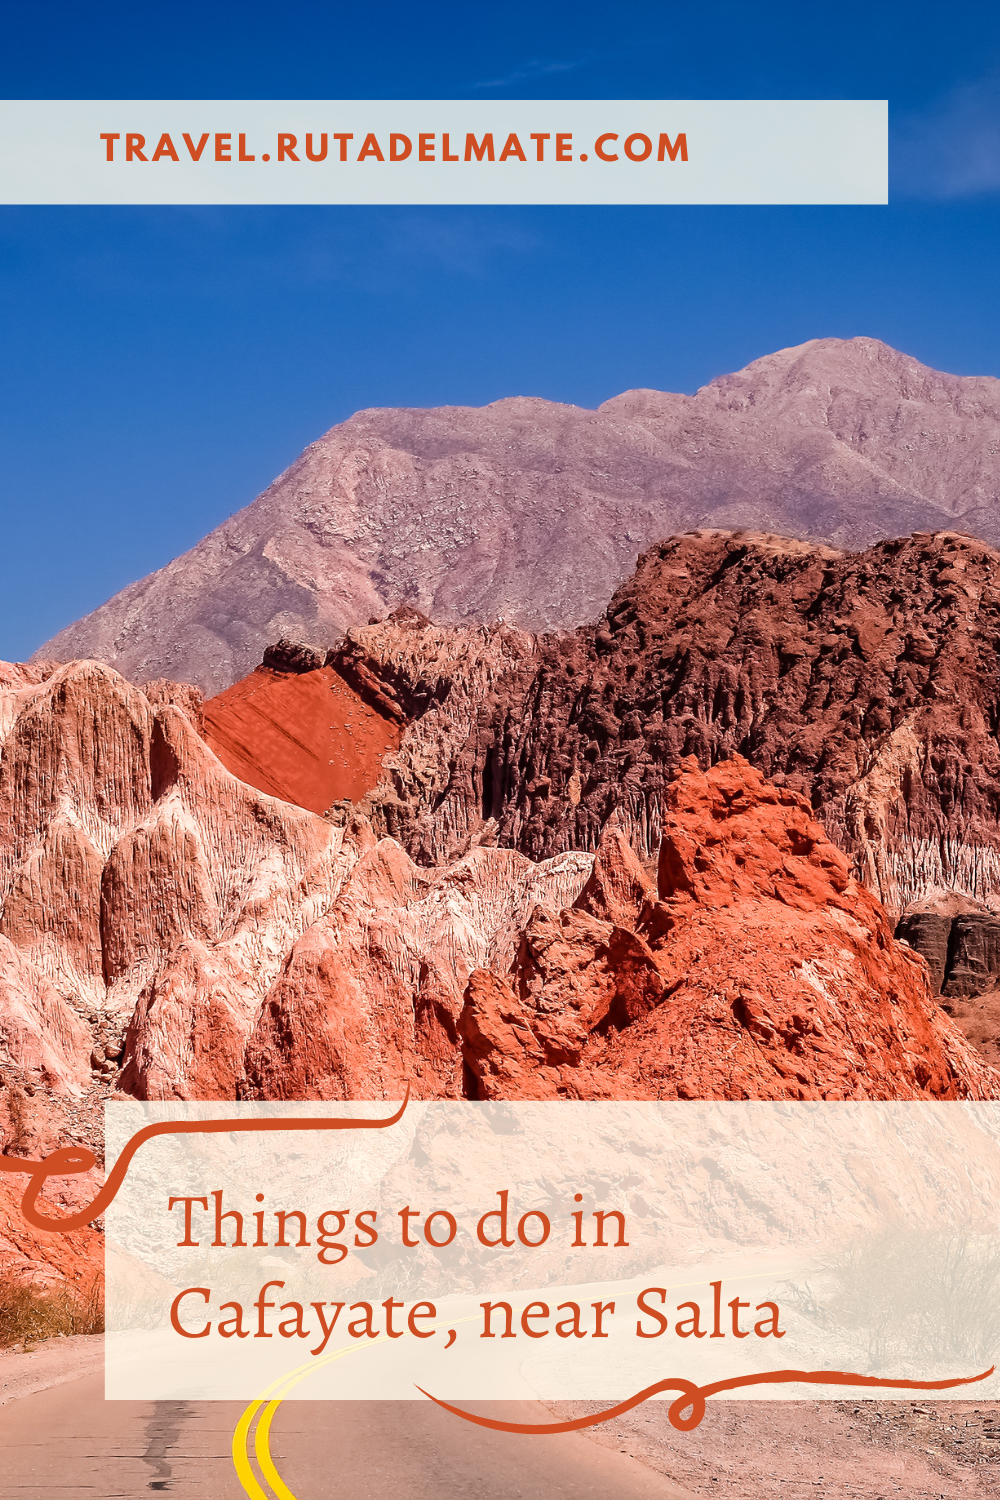 Things to do in Cafayate, Salta, Argentina